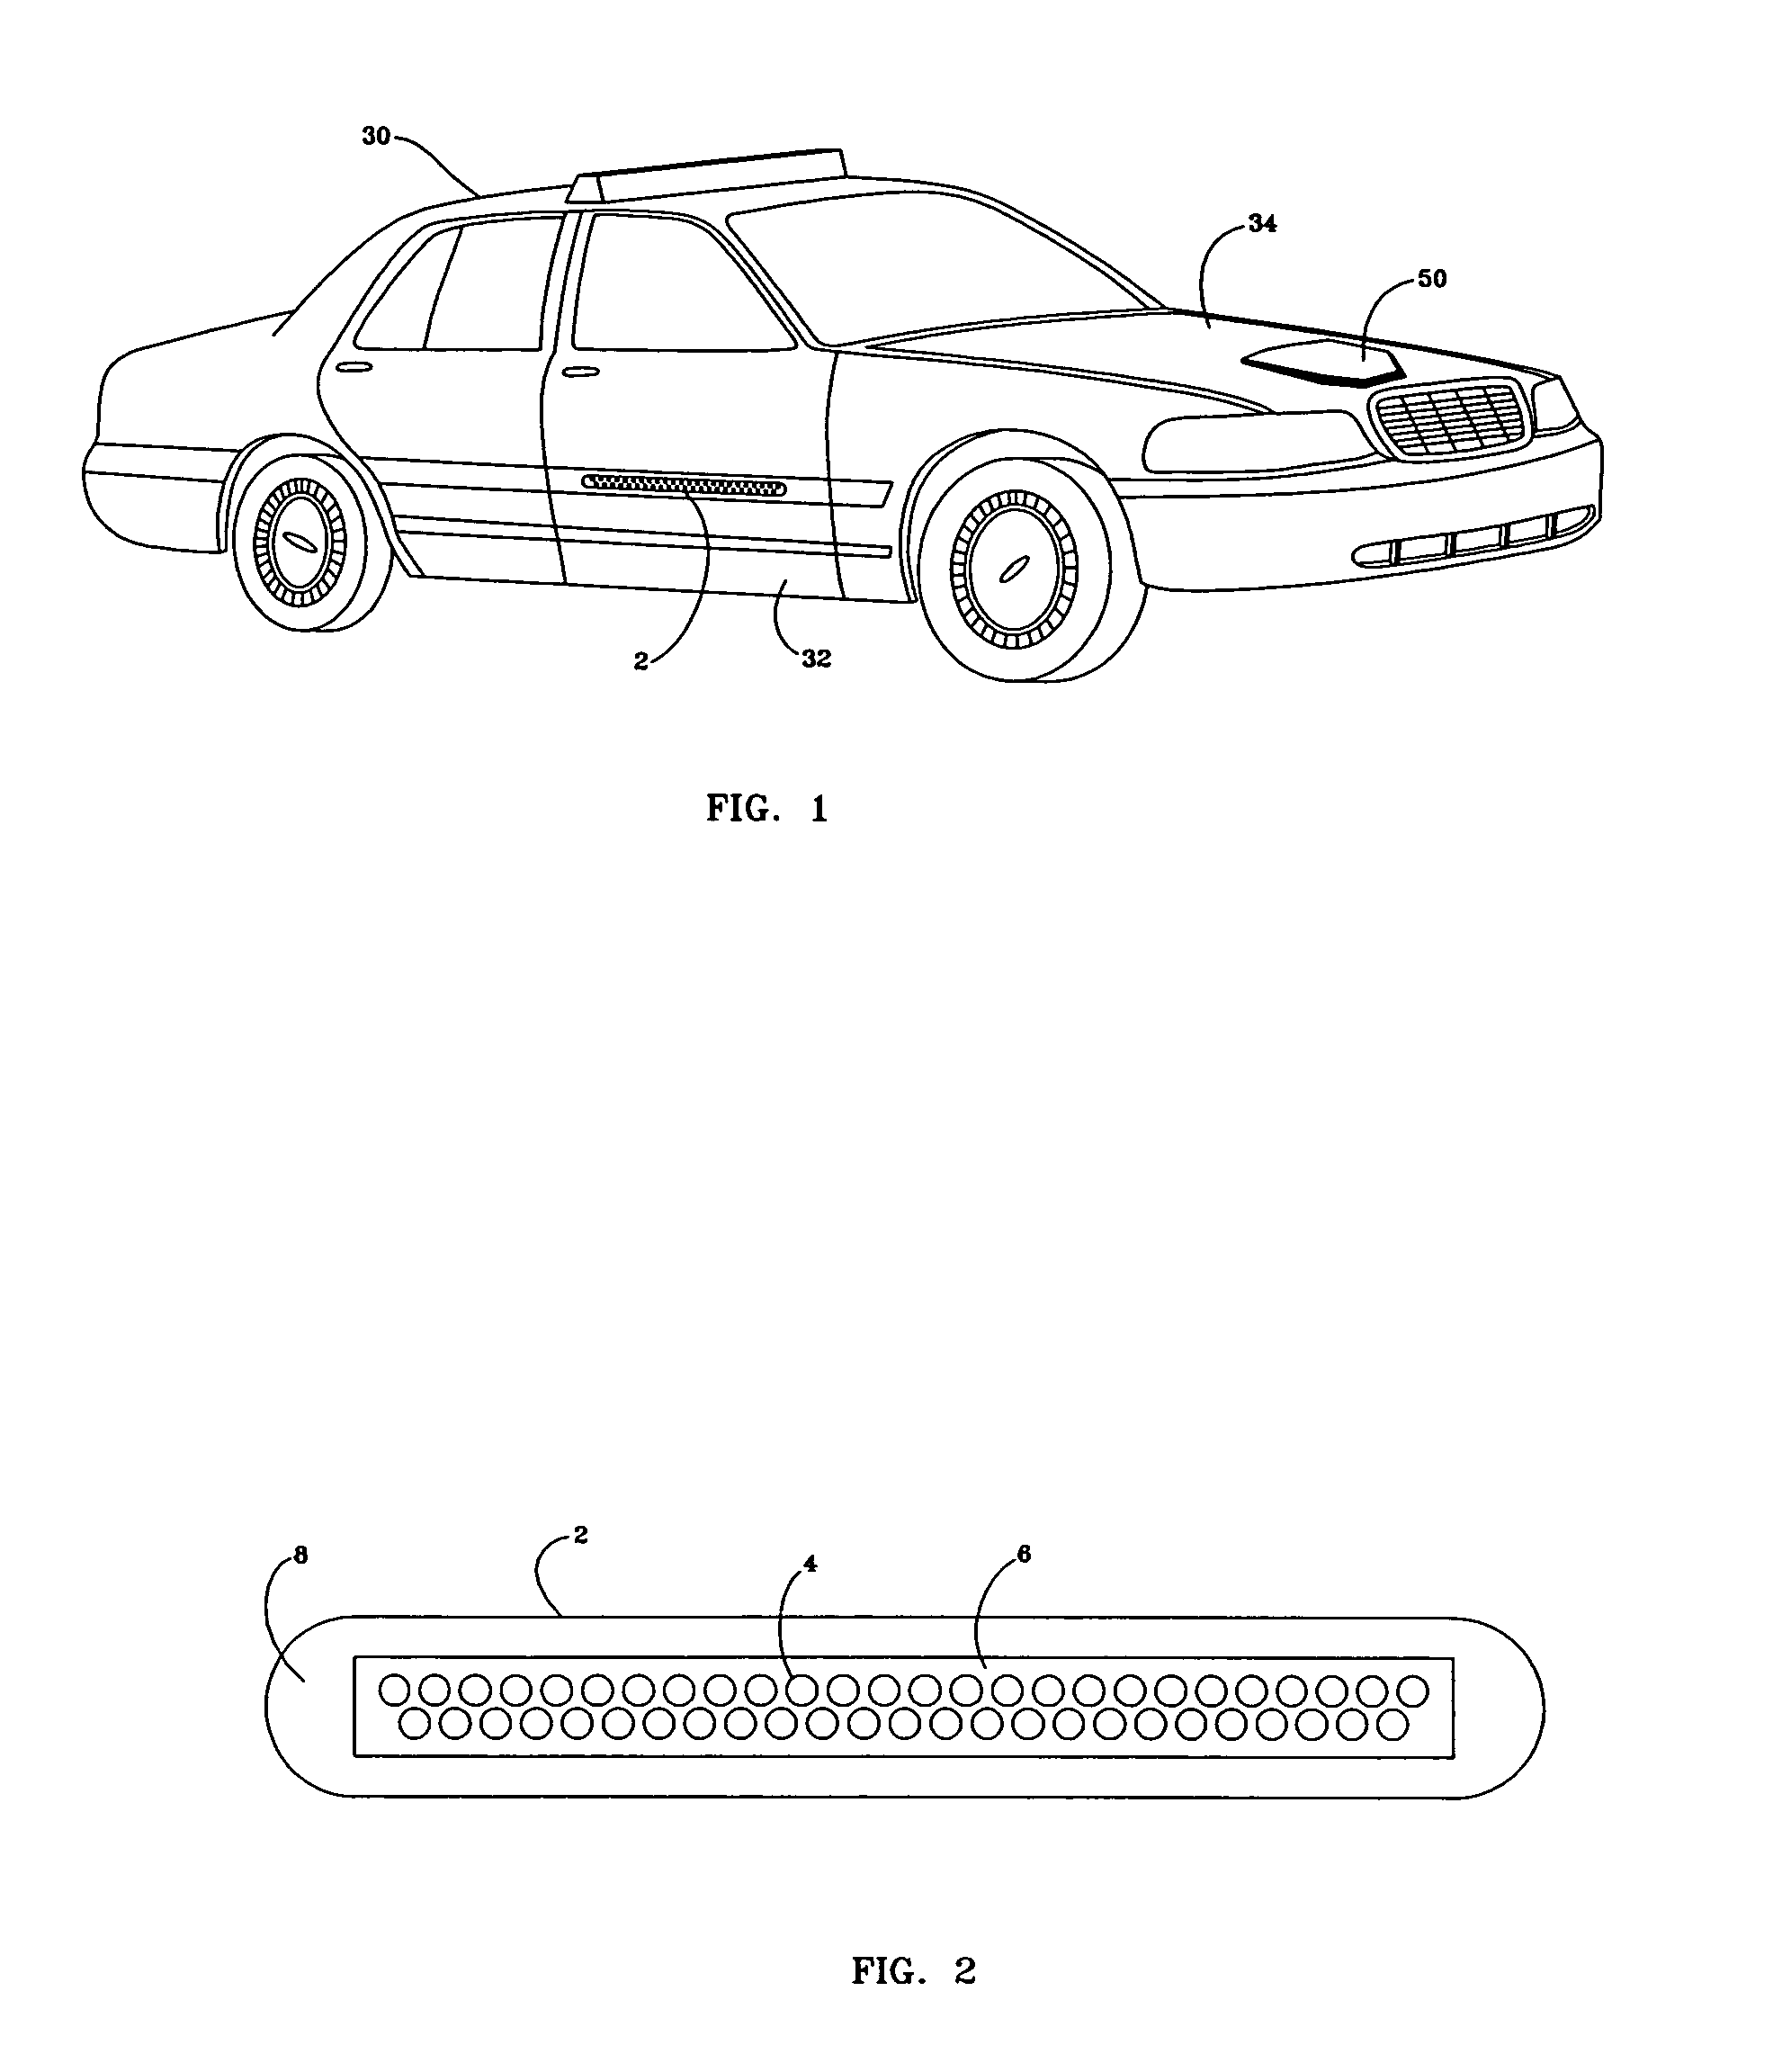 Device and system for emergency vehicle lighting